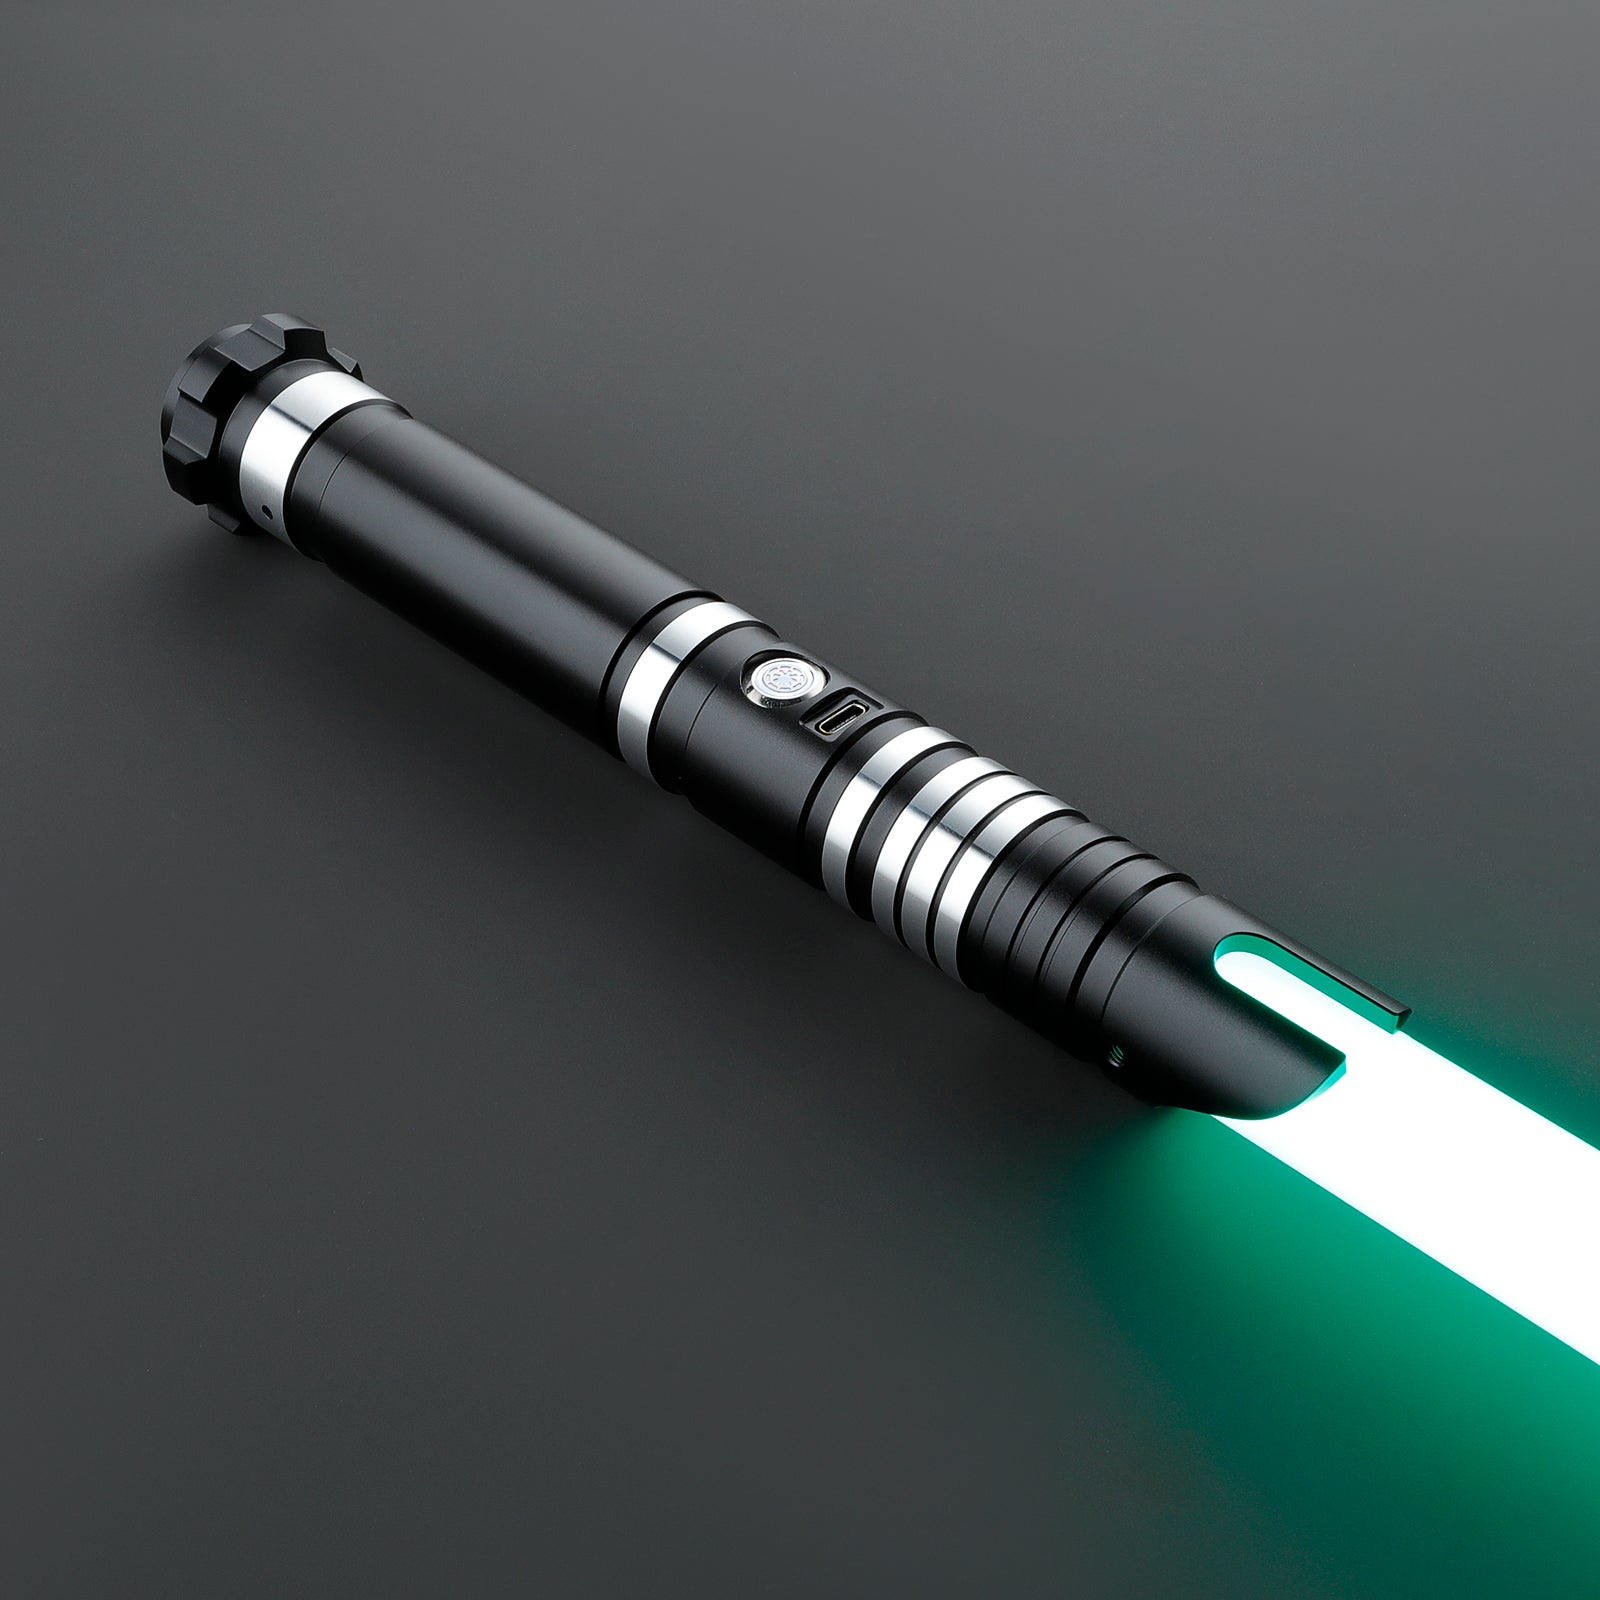 SaberCustom dueling lightsaber infinite color changing 12 sound fonts smooth swing motion control